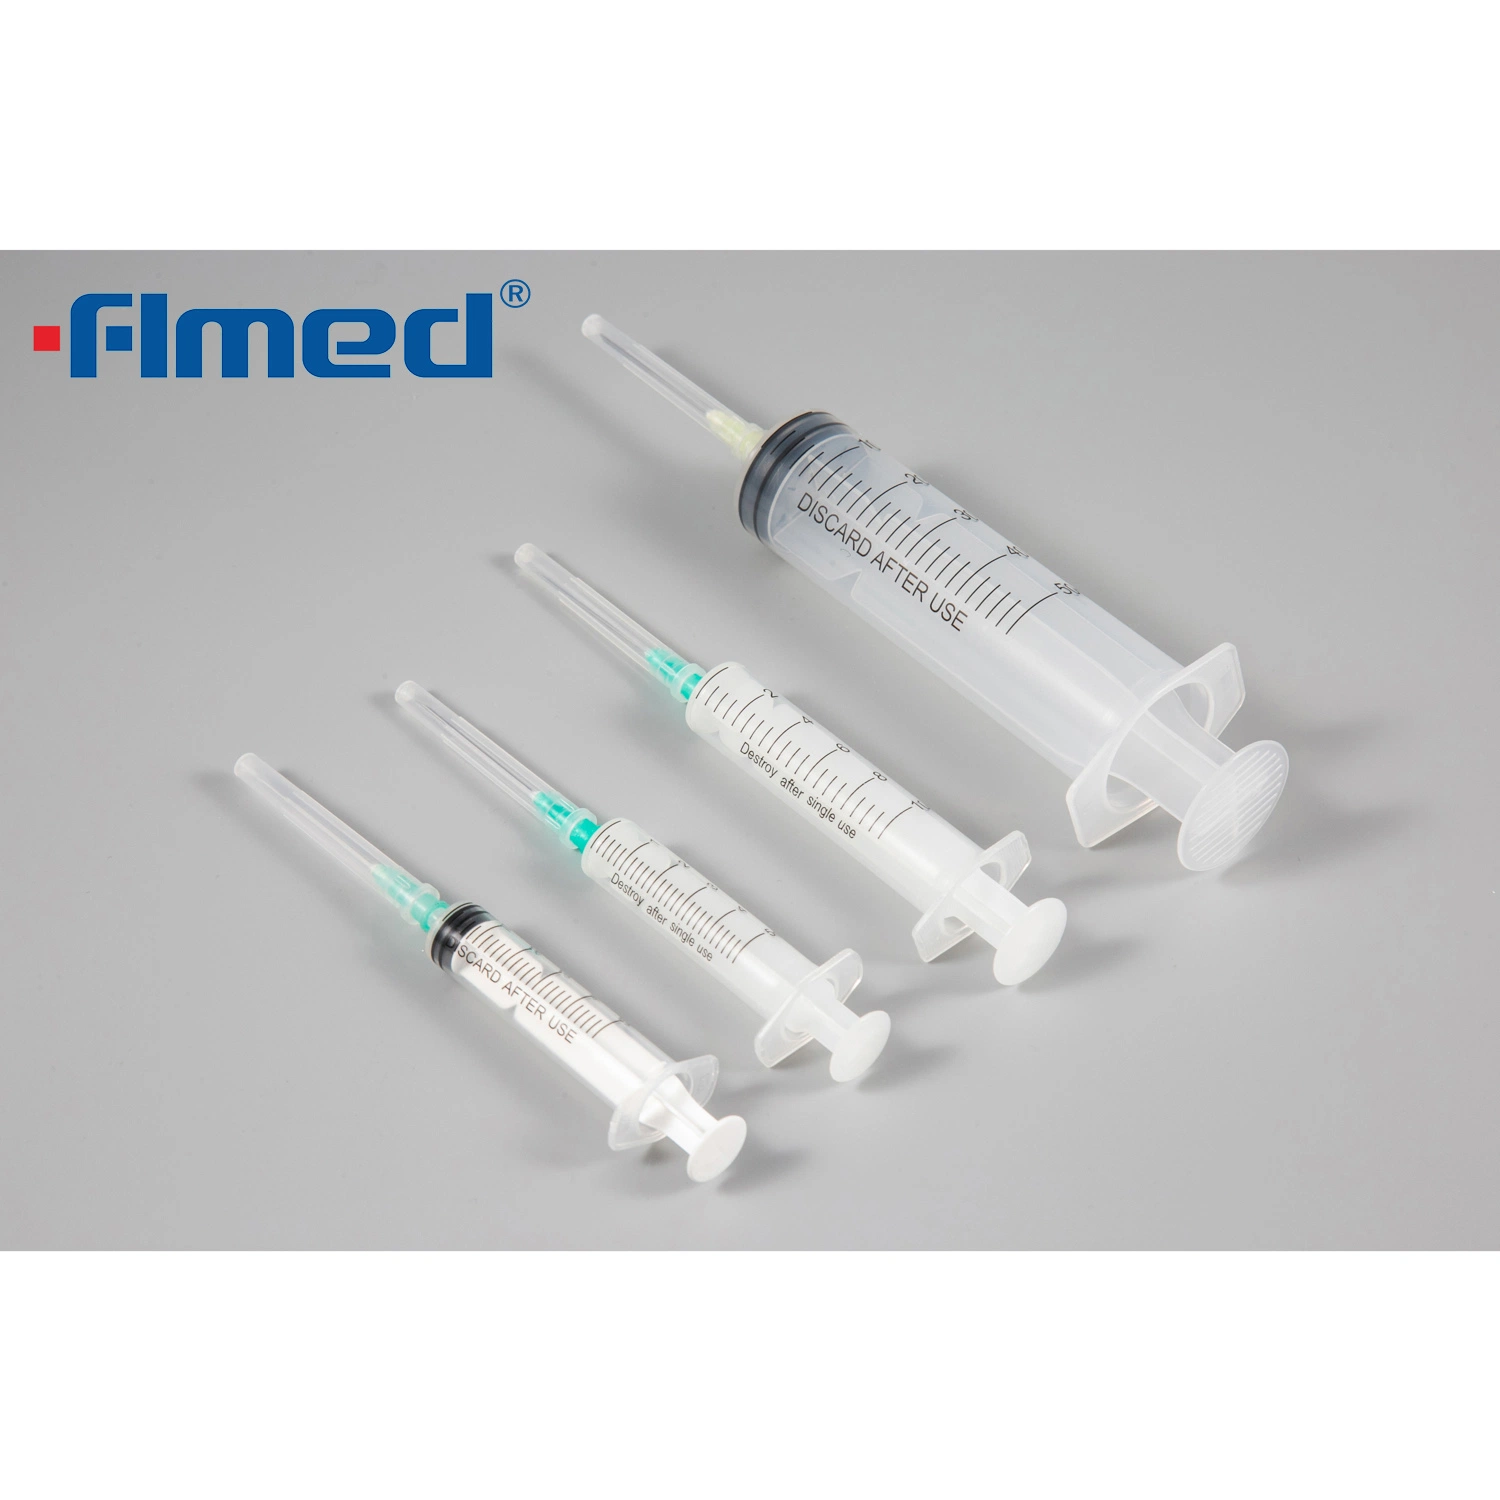 Disposable Medical Syringe with Injection Needle 1cc 2cc 3cc 5cc 10cc 20cc 50cc ISO13485 and CE Approval